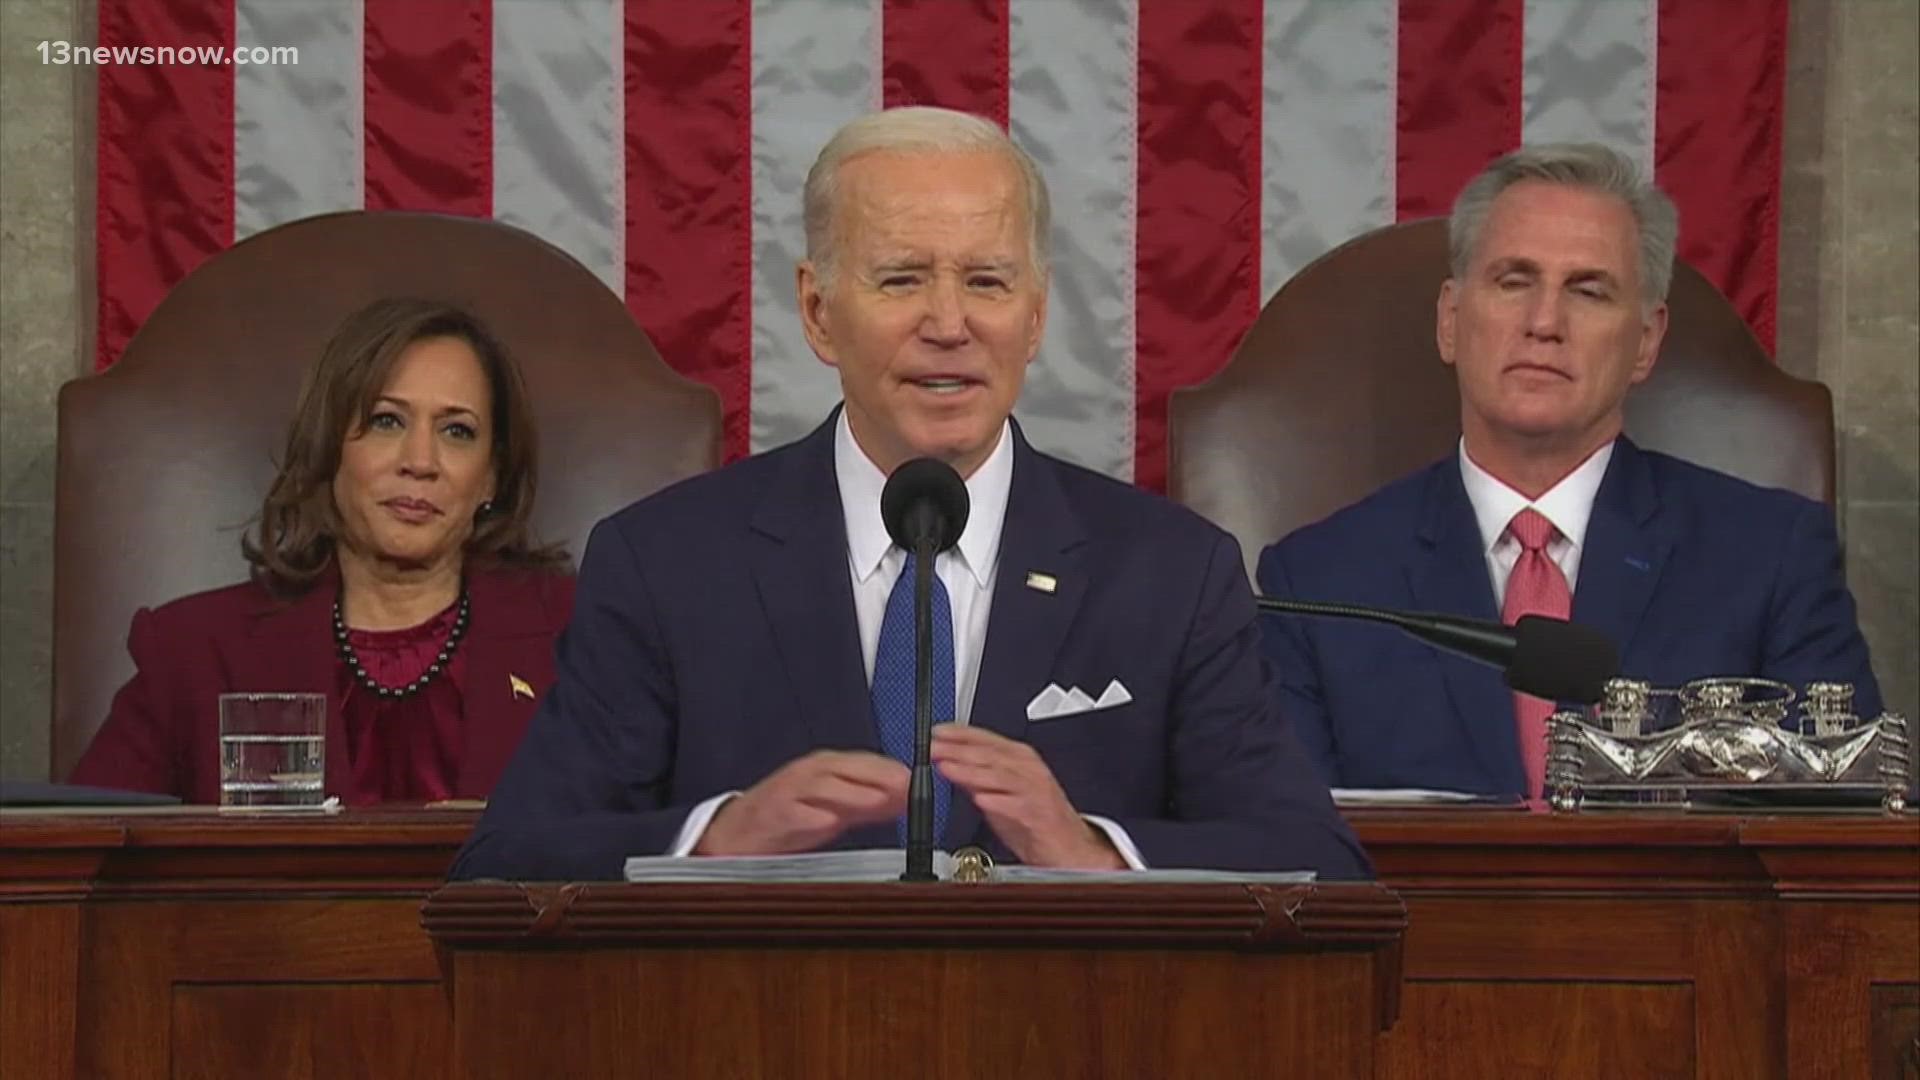 President Biden used his address to reassure a country beset by pessimism and fraught political divisions.